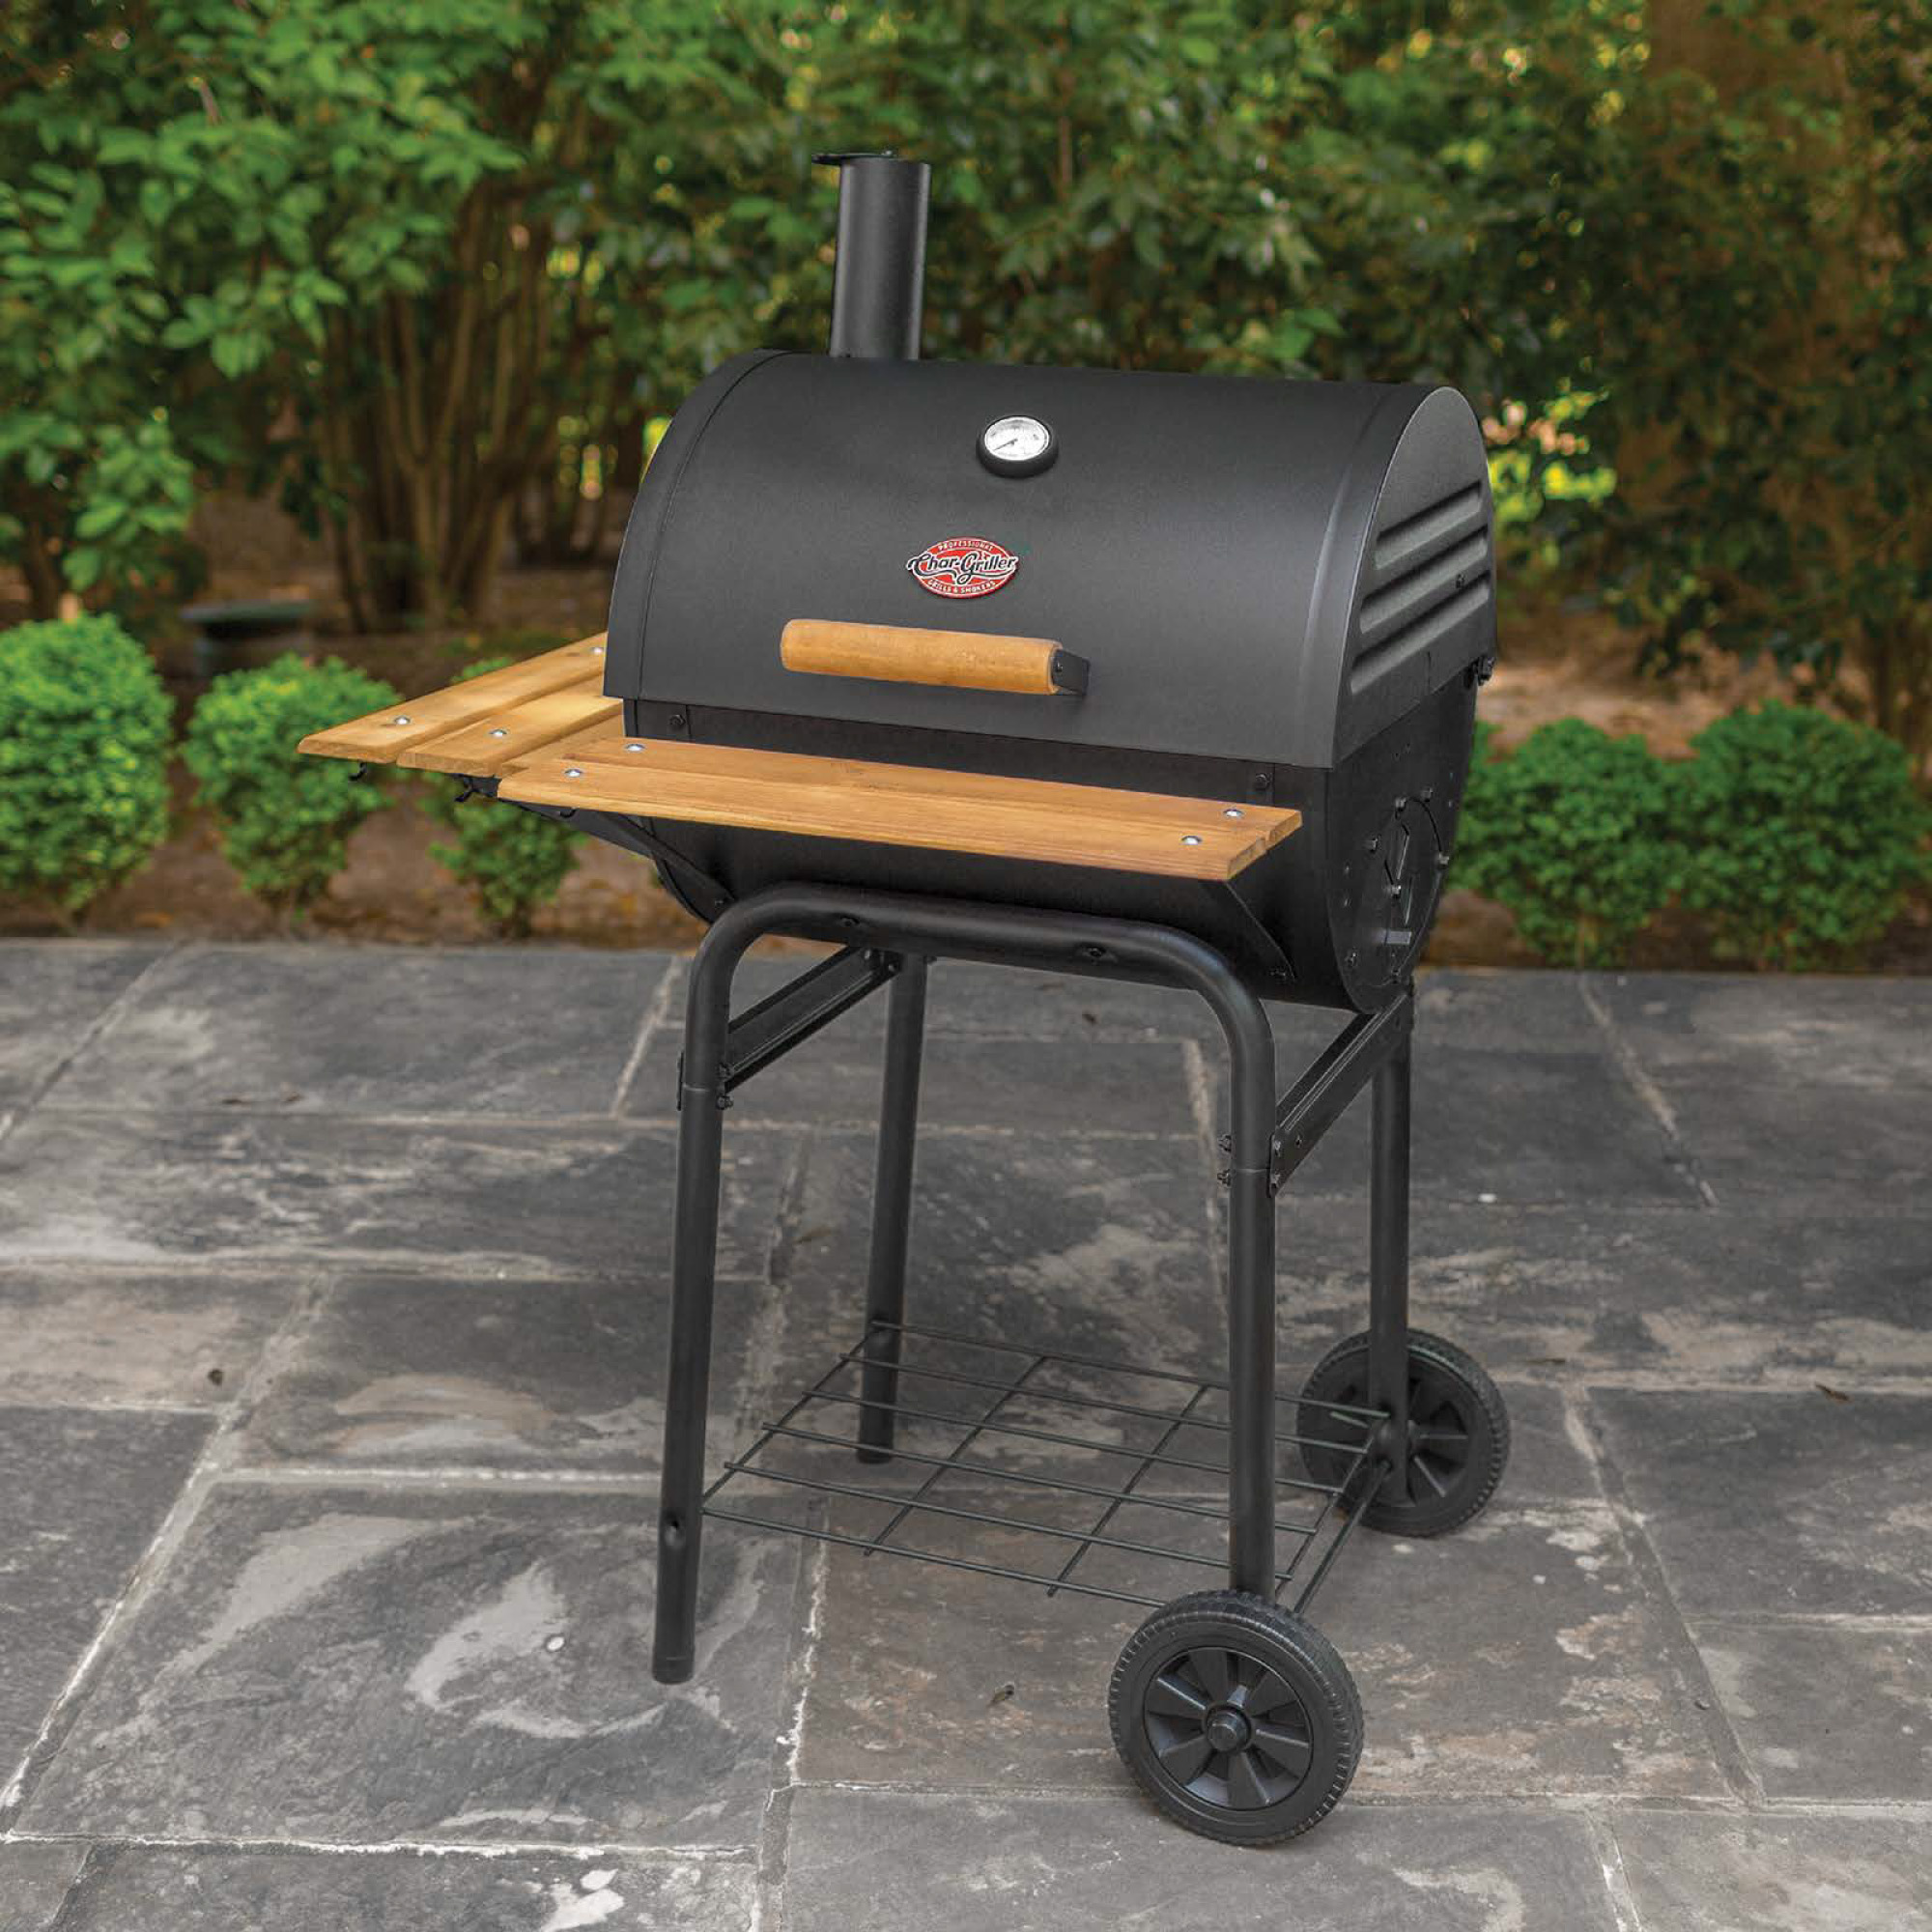 Char-Griller Wrangler Outdoor Cooking Heavy Duty Steel Charcoal Barbecue Grill - image 2 of 16